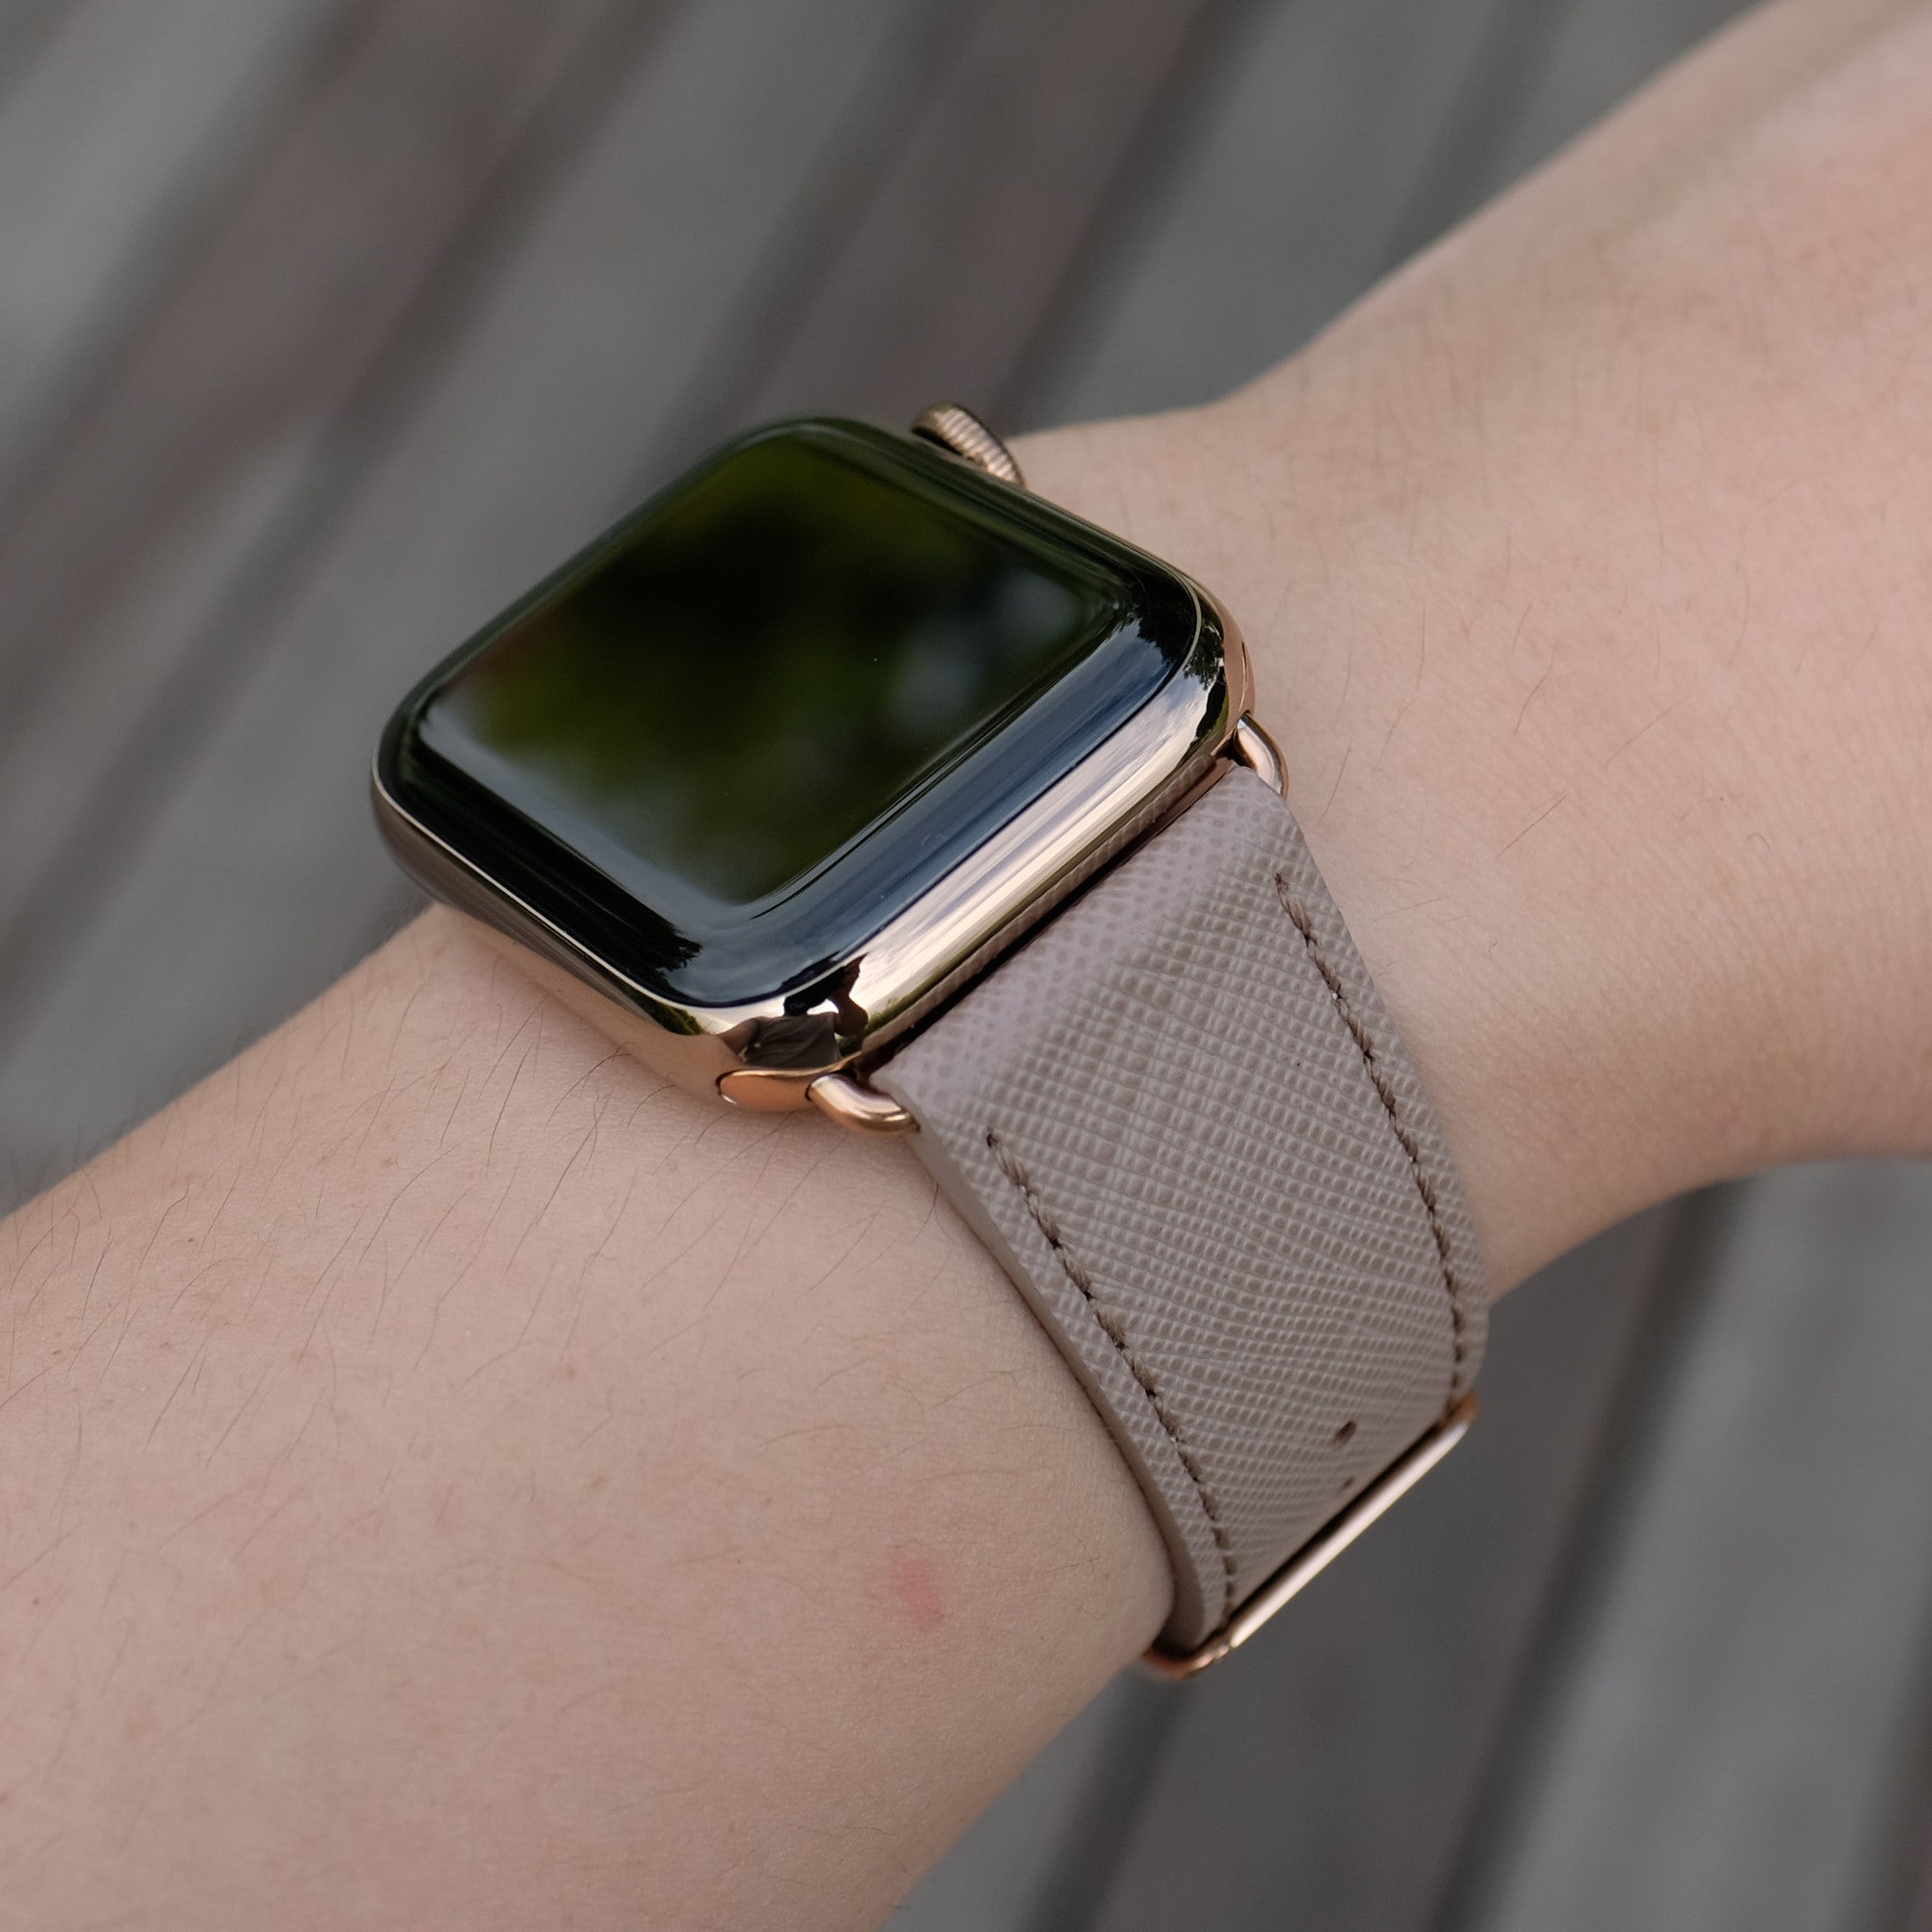 Pin and Buckle Apple Watch Bands - Saffiano - Textured Leather Apple Watch Bands - Taupe - Gold